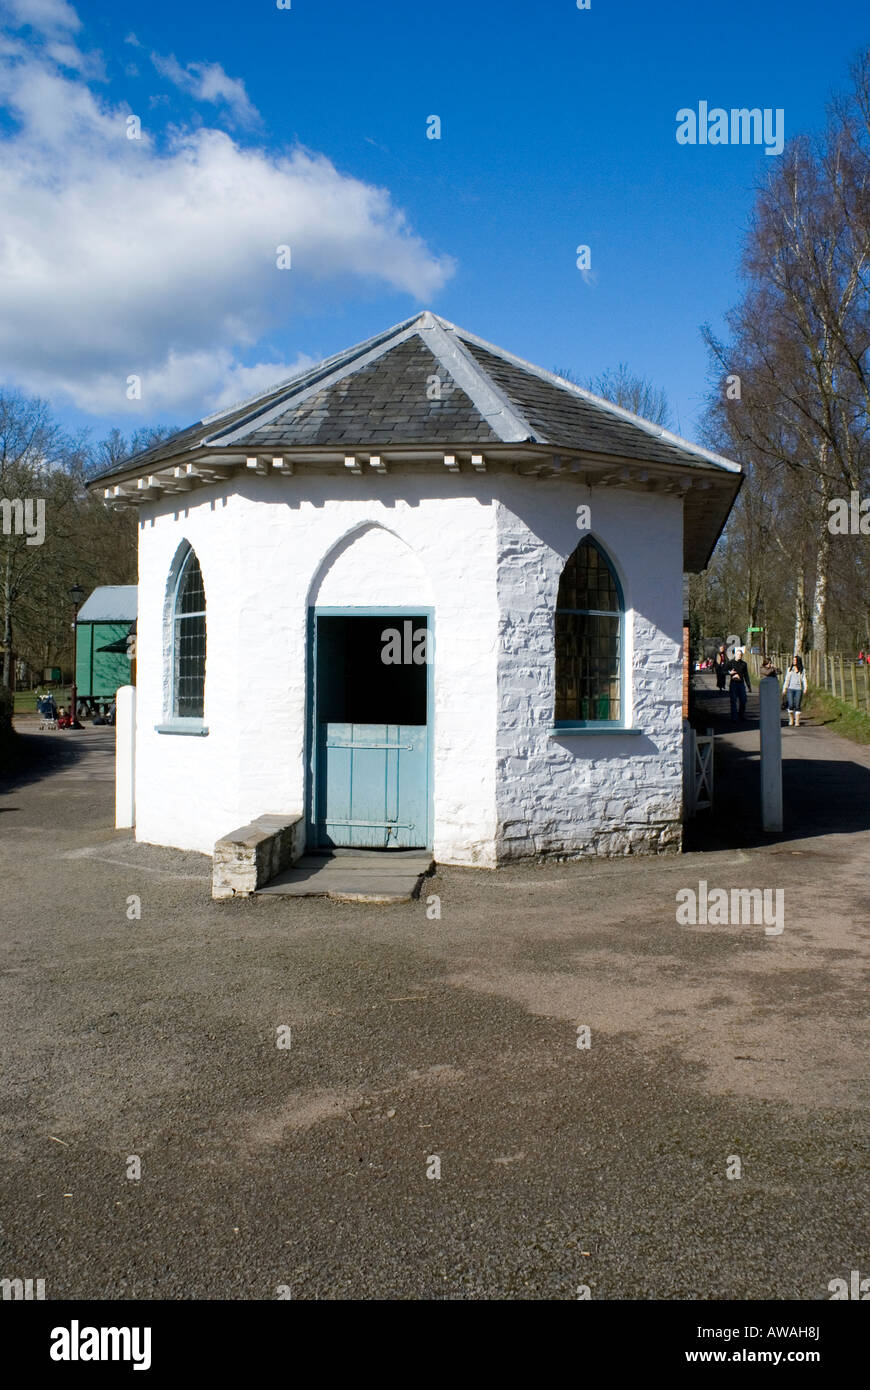 toll house national history museum st fagans cardiff south wales Stock Photo